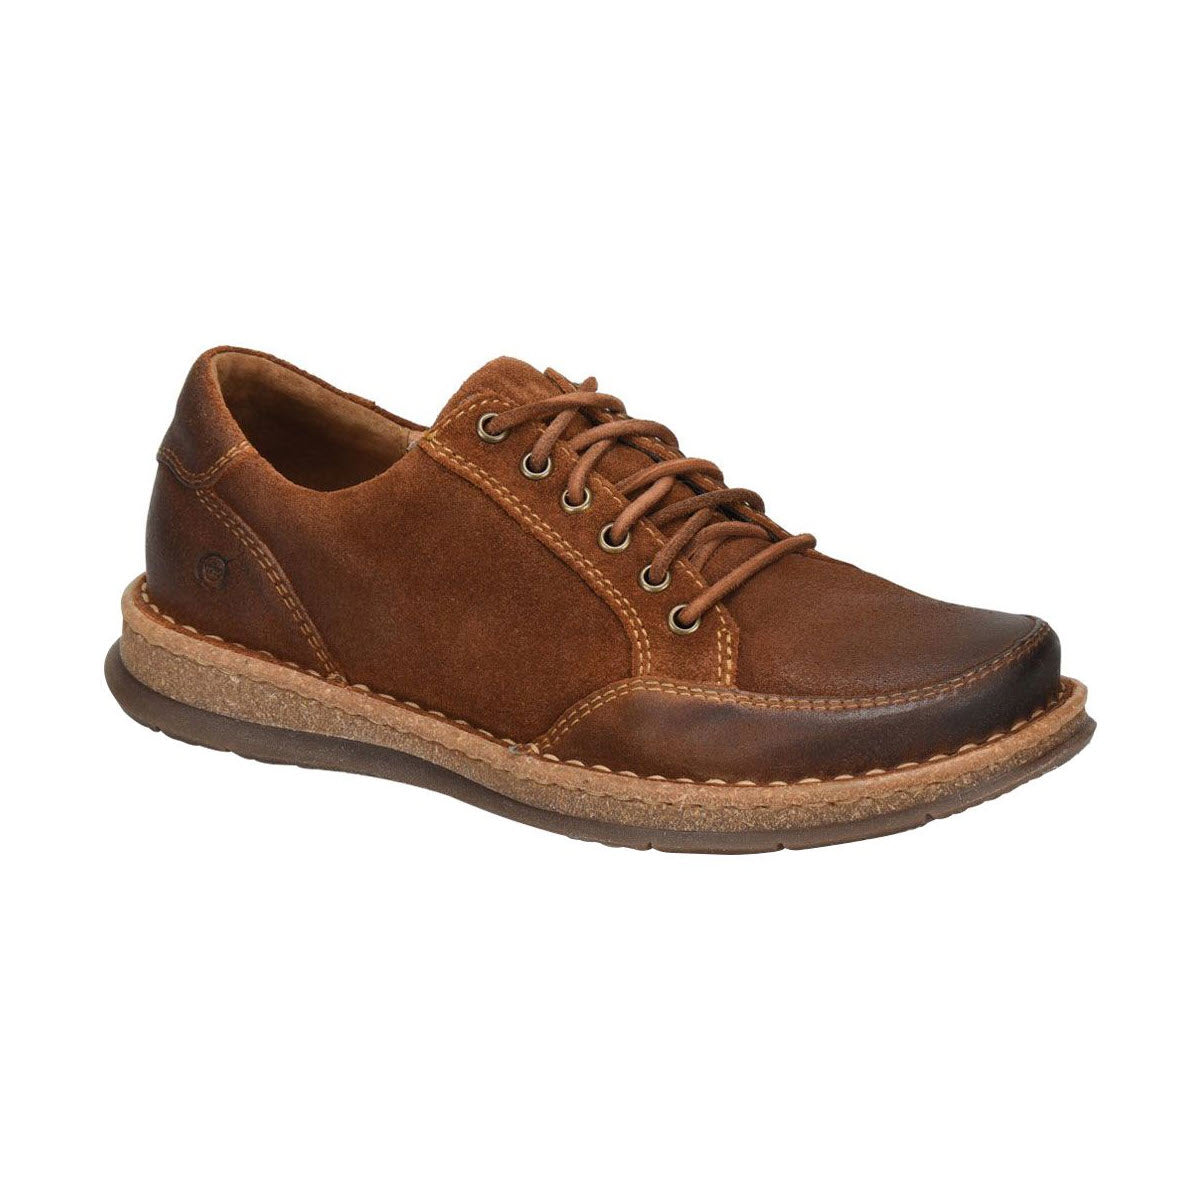 A single Born Bronson Lace Oxford Tan Saddle men’s shoe with laces, featuring a durable rubber outsole and visible stitching.